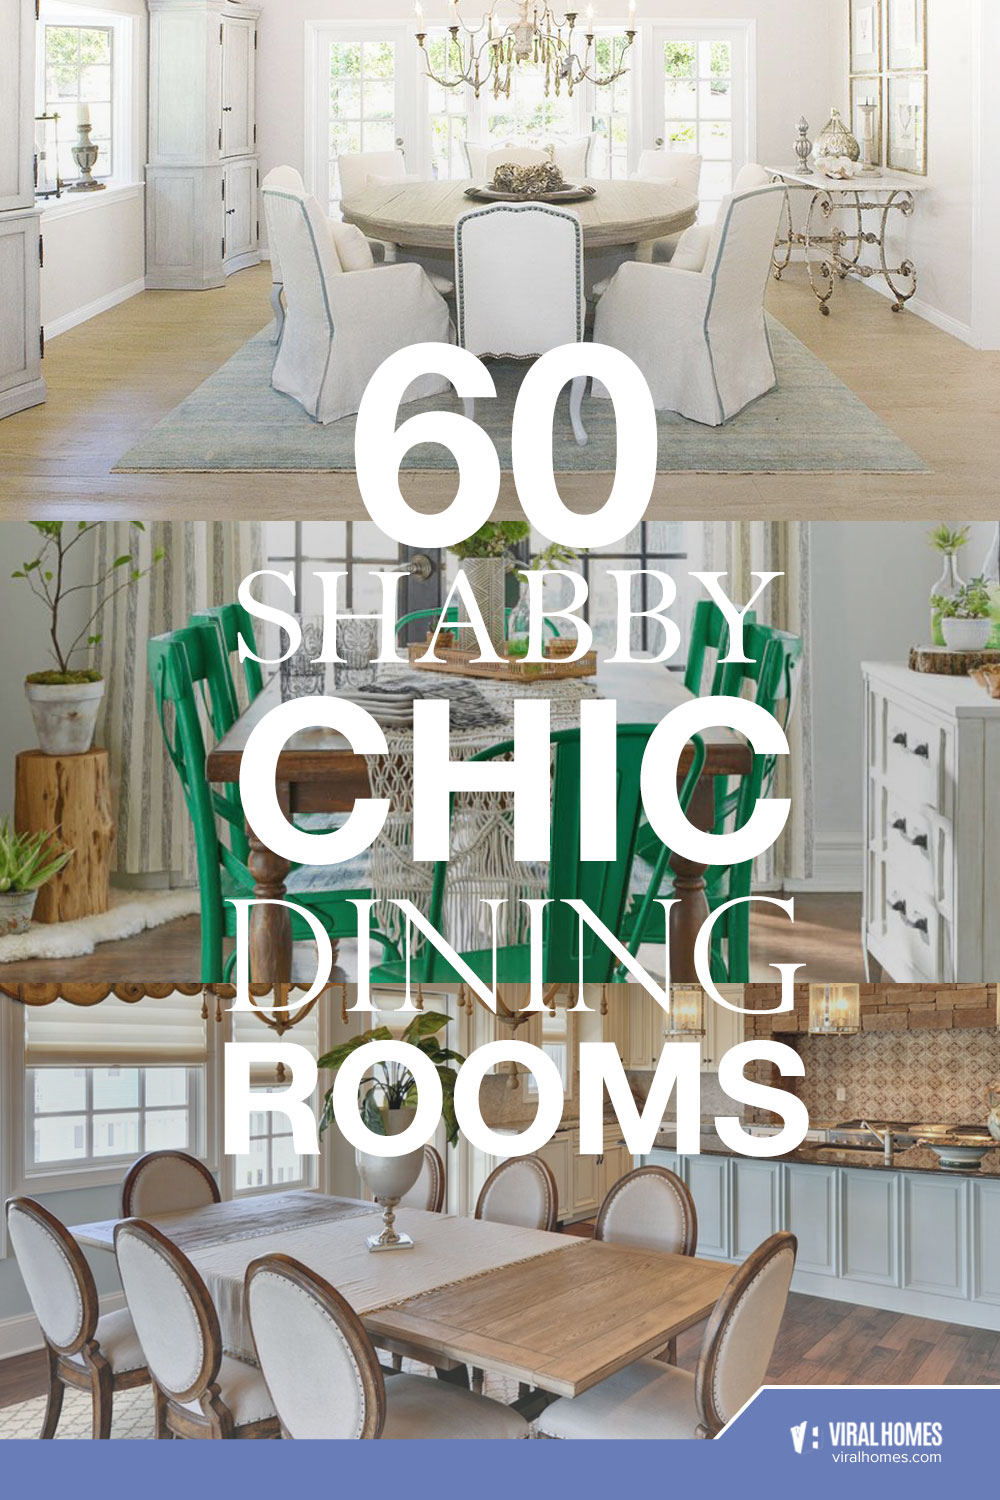 Shabby Chic Dining Room Designs That's Easy to the Eyes